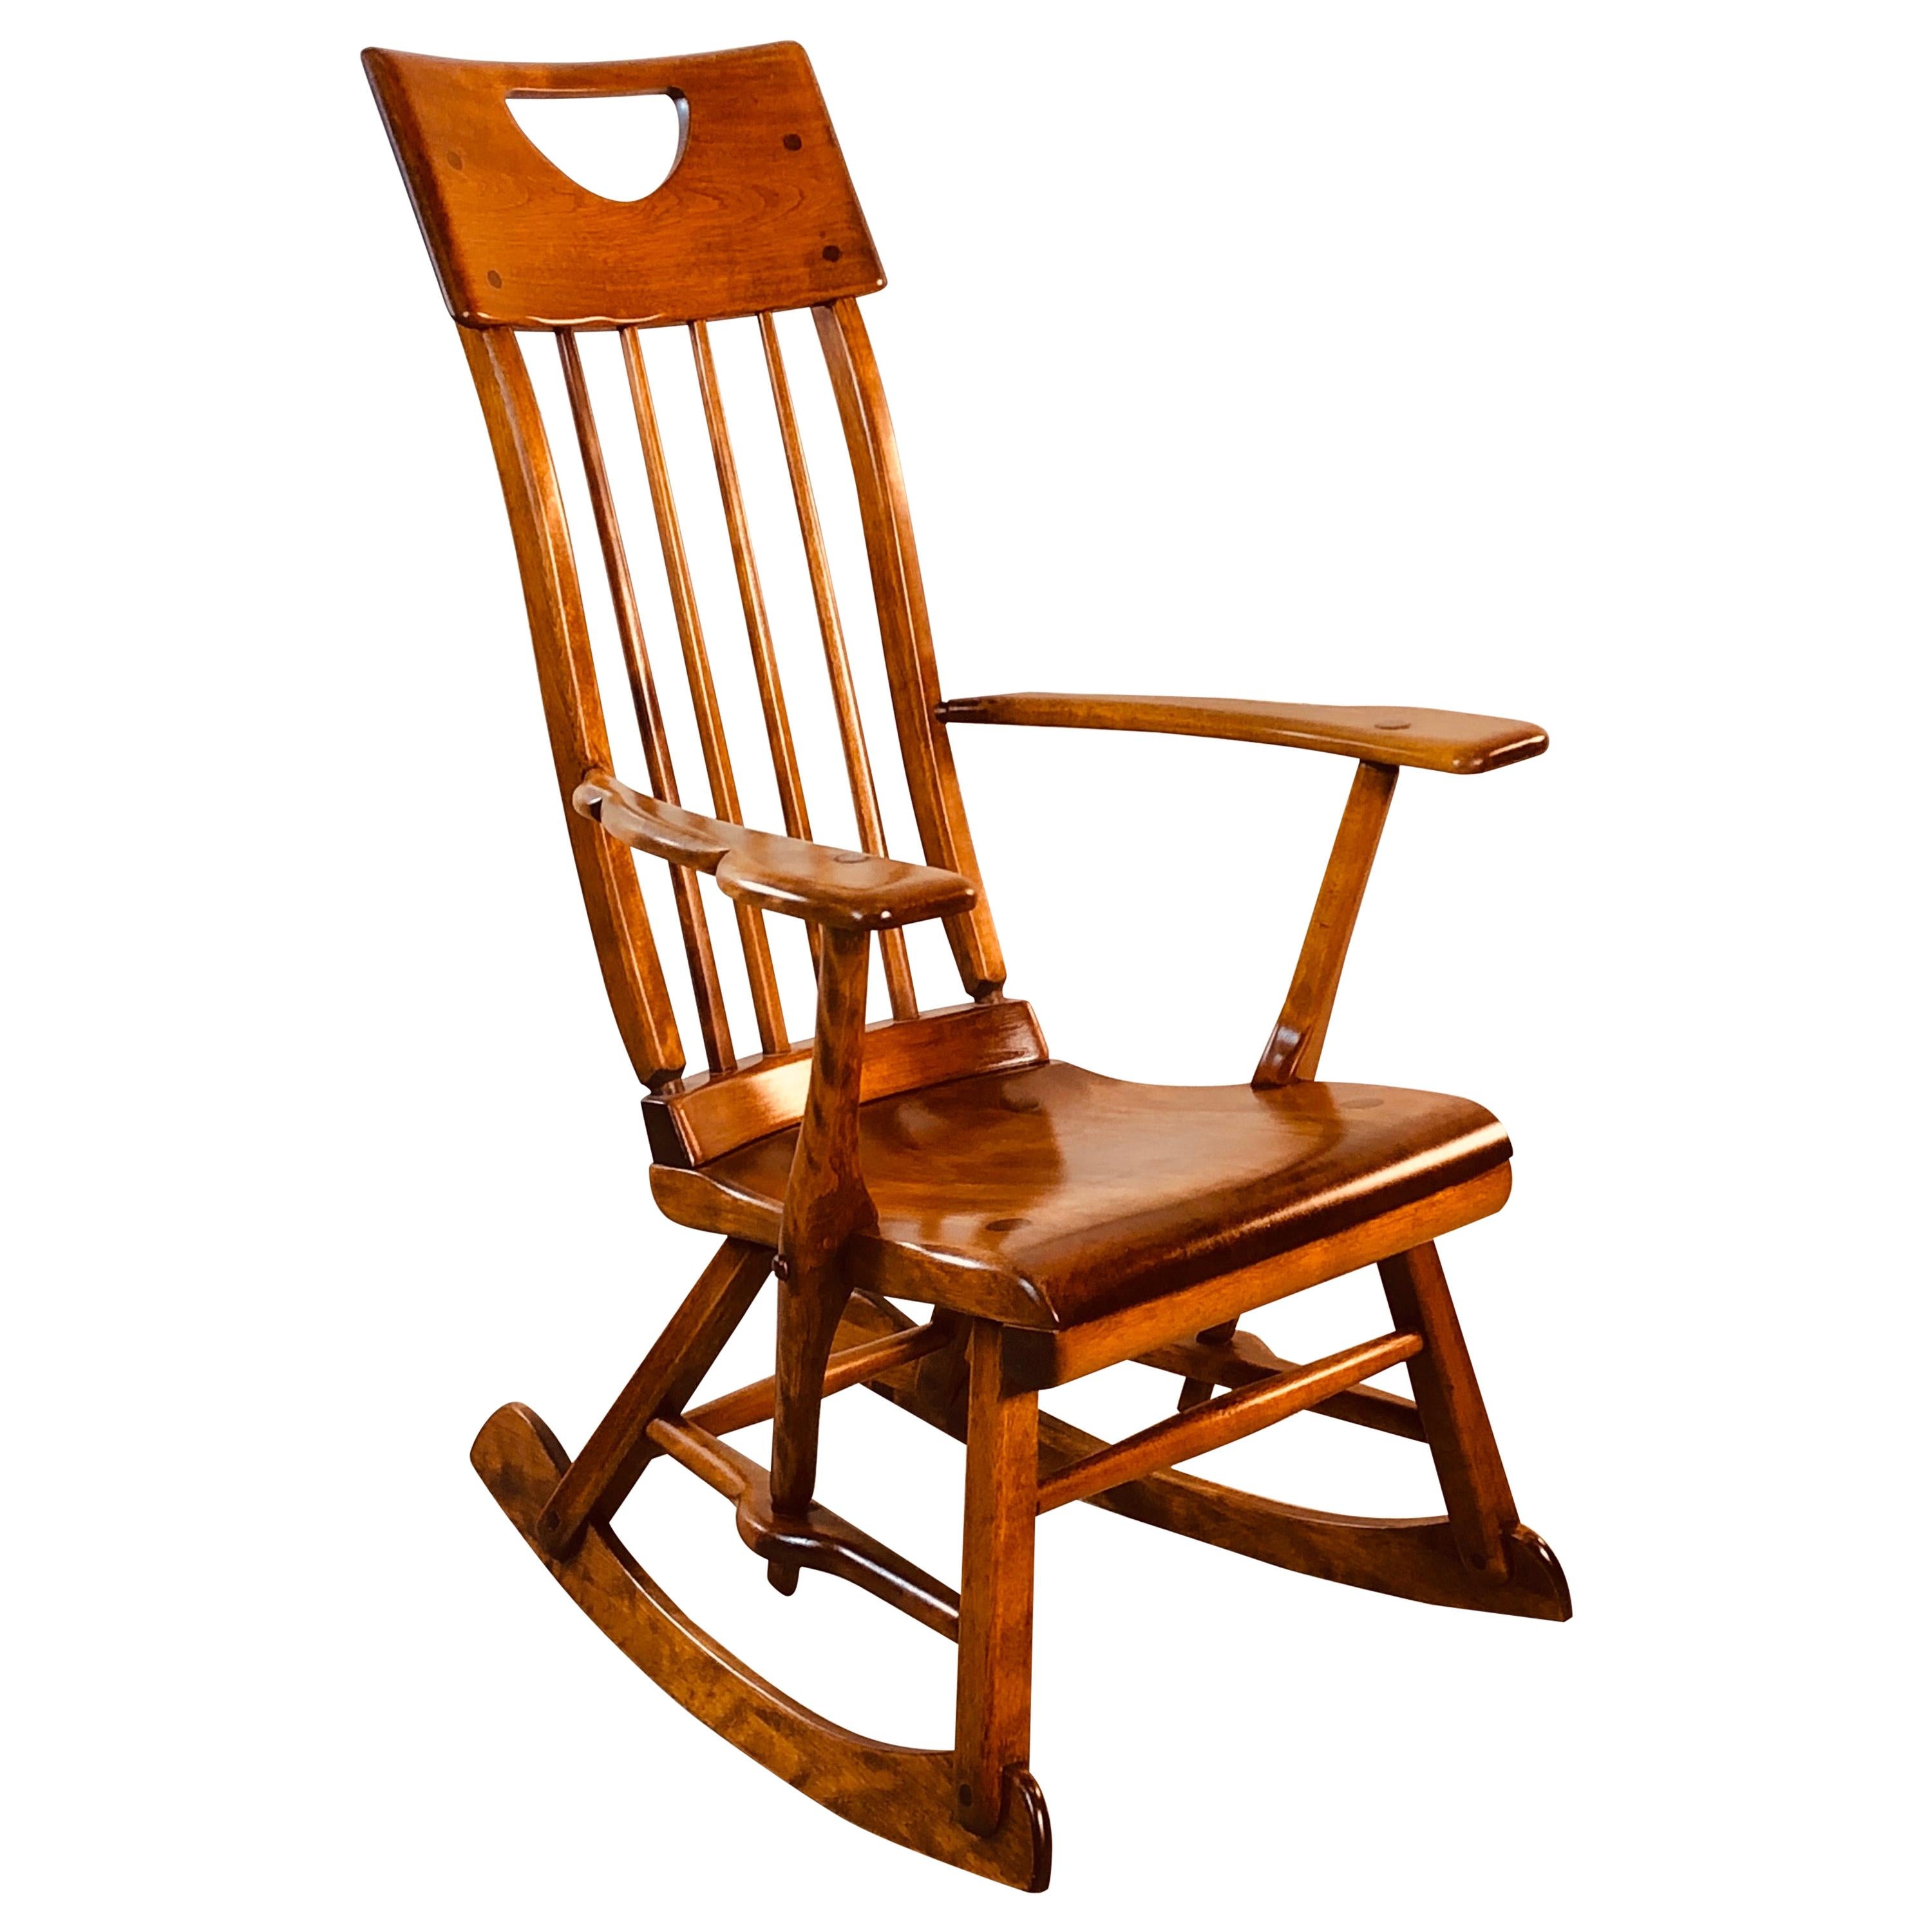 Colonial American High-Back Rocking Chair by Herman De Vries for Sikes Furniture